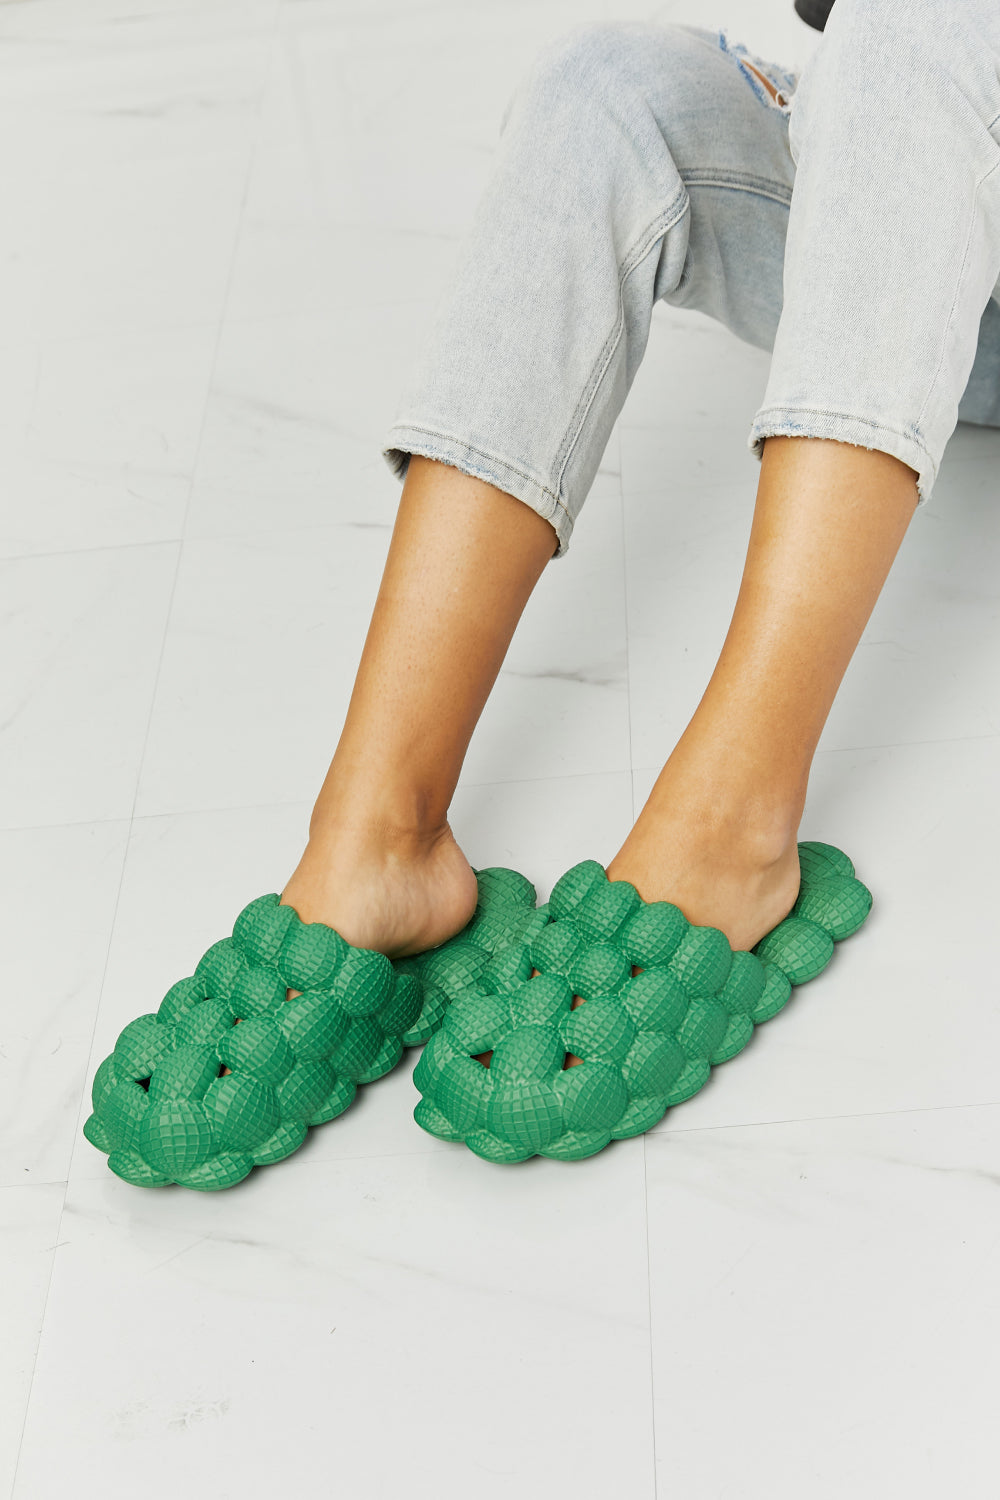 NOOK JOI Laid Back Bubble Slides in Green-Shoes-Inspired by Justeen-Women's Clothing Boutique in Chicago, Illinois